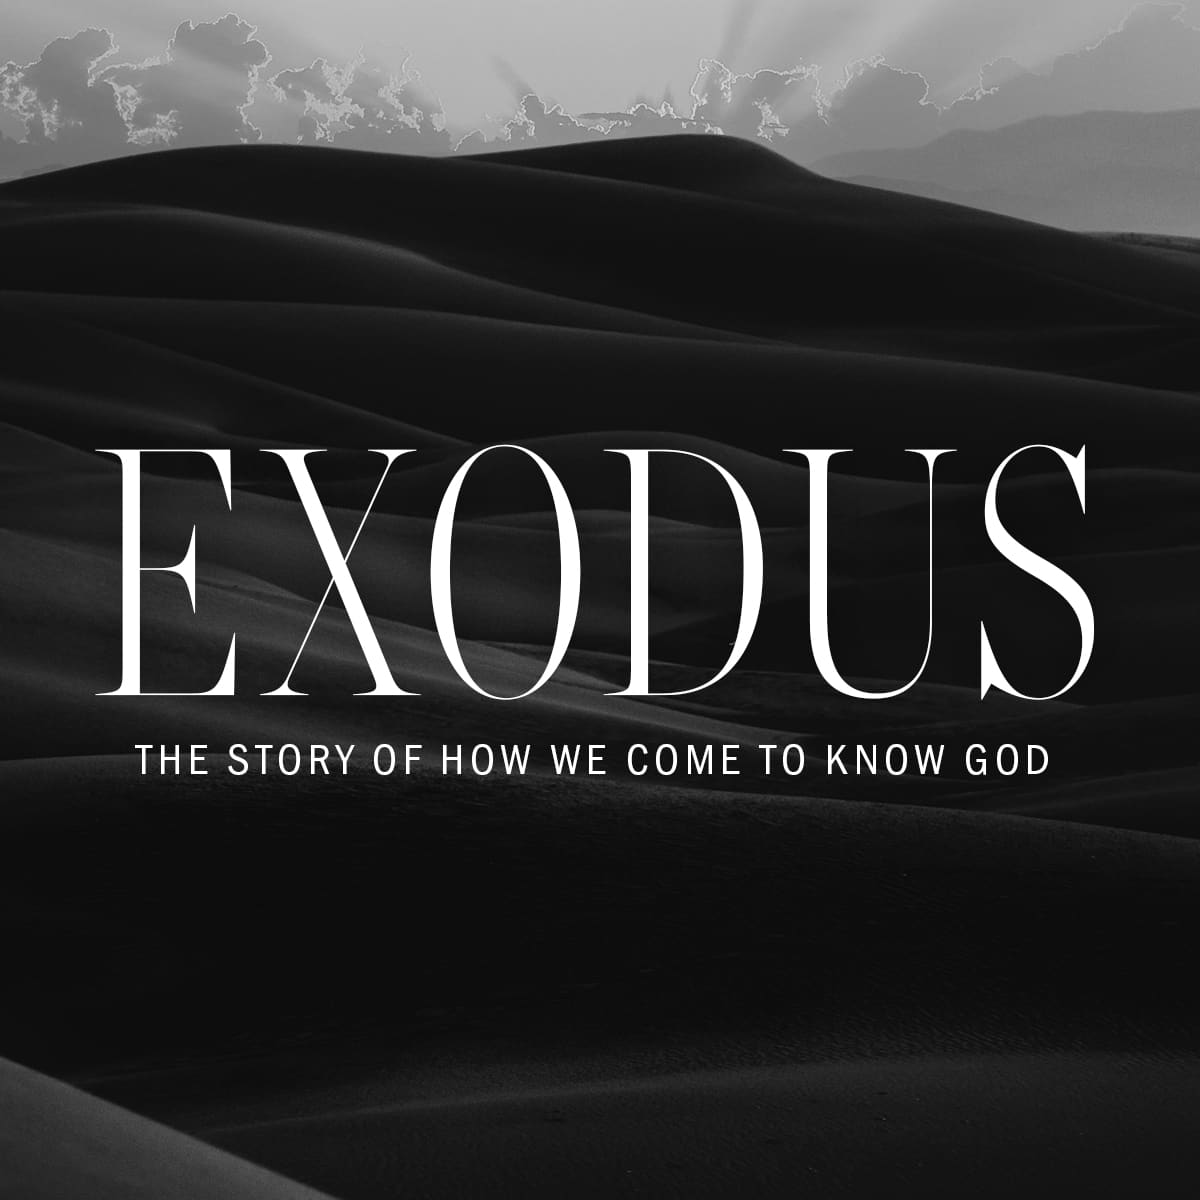 Exodus: The Story of How We Come to Know God